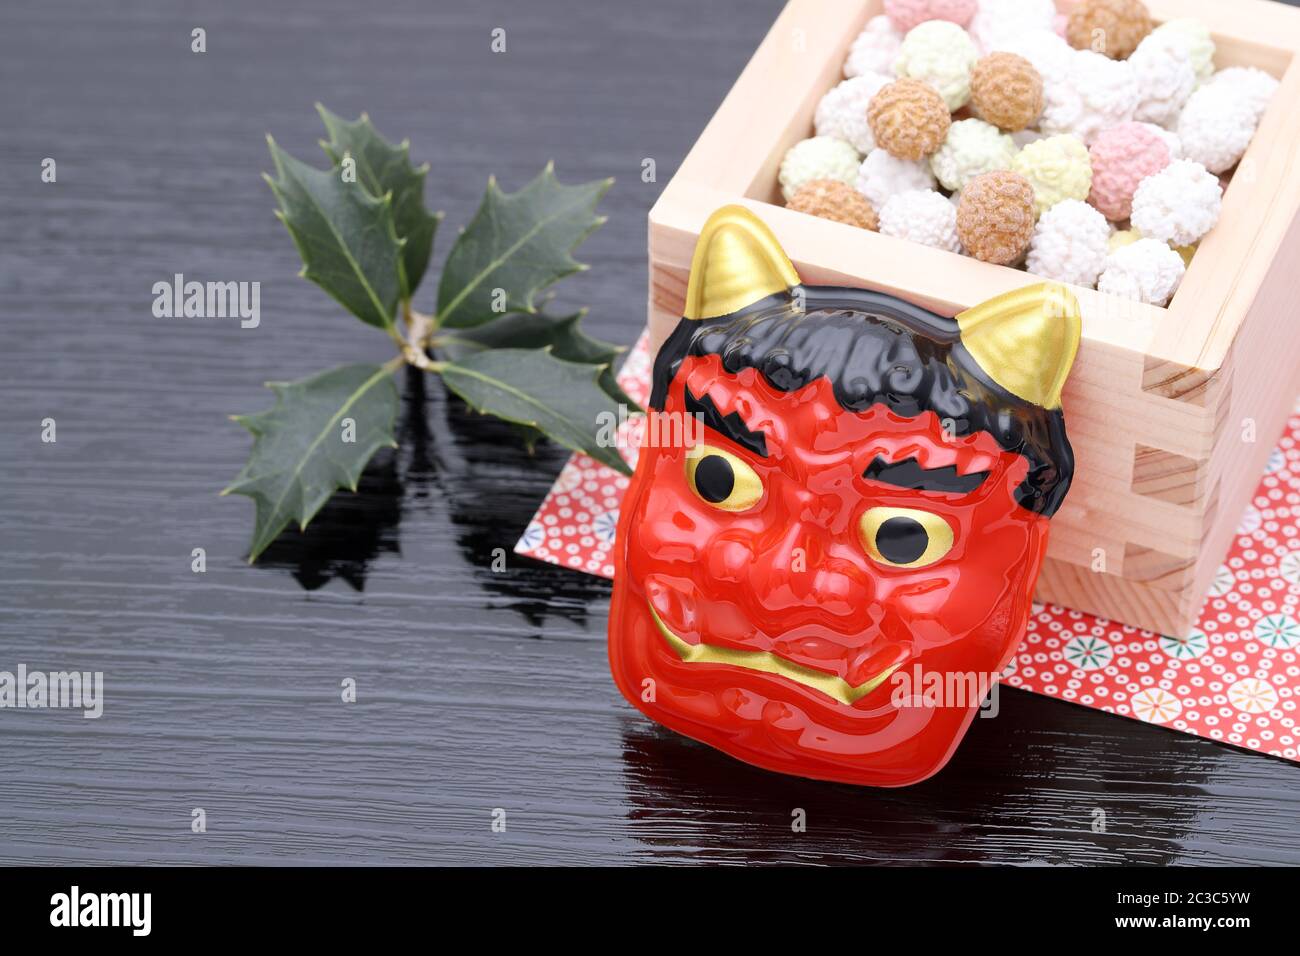 Japanese traditional Setsubun event, Masks of Oni demon and soybeans are used on an annual event Stock Photo